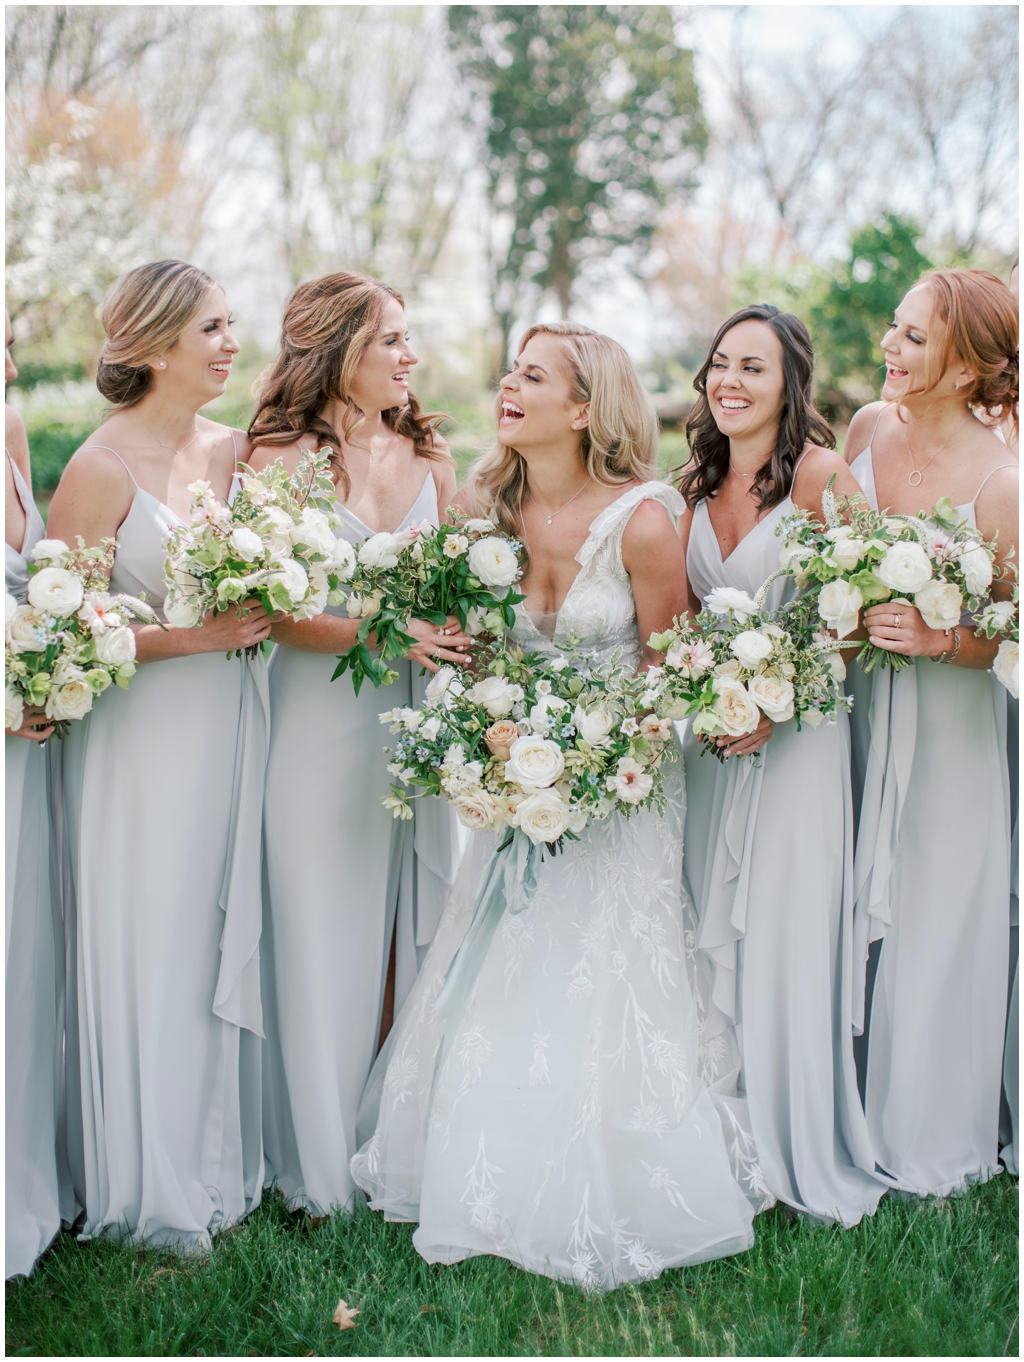 Soft gray blue bridesmaid dresses with full neutral charming rose bouquets